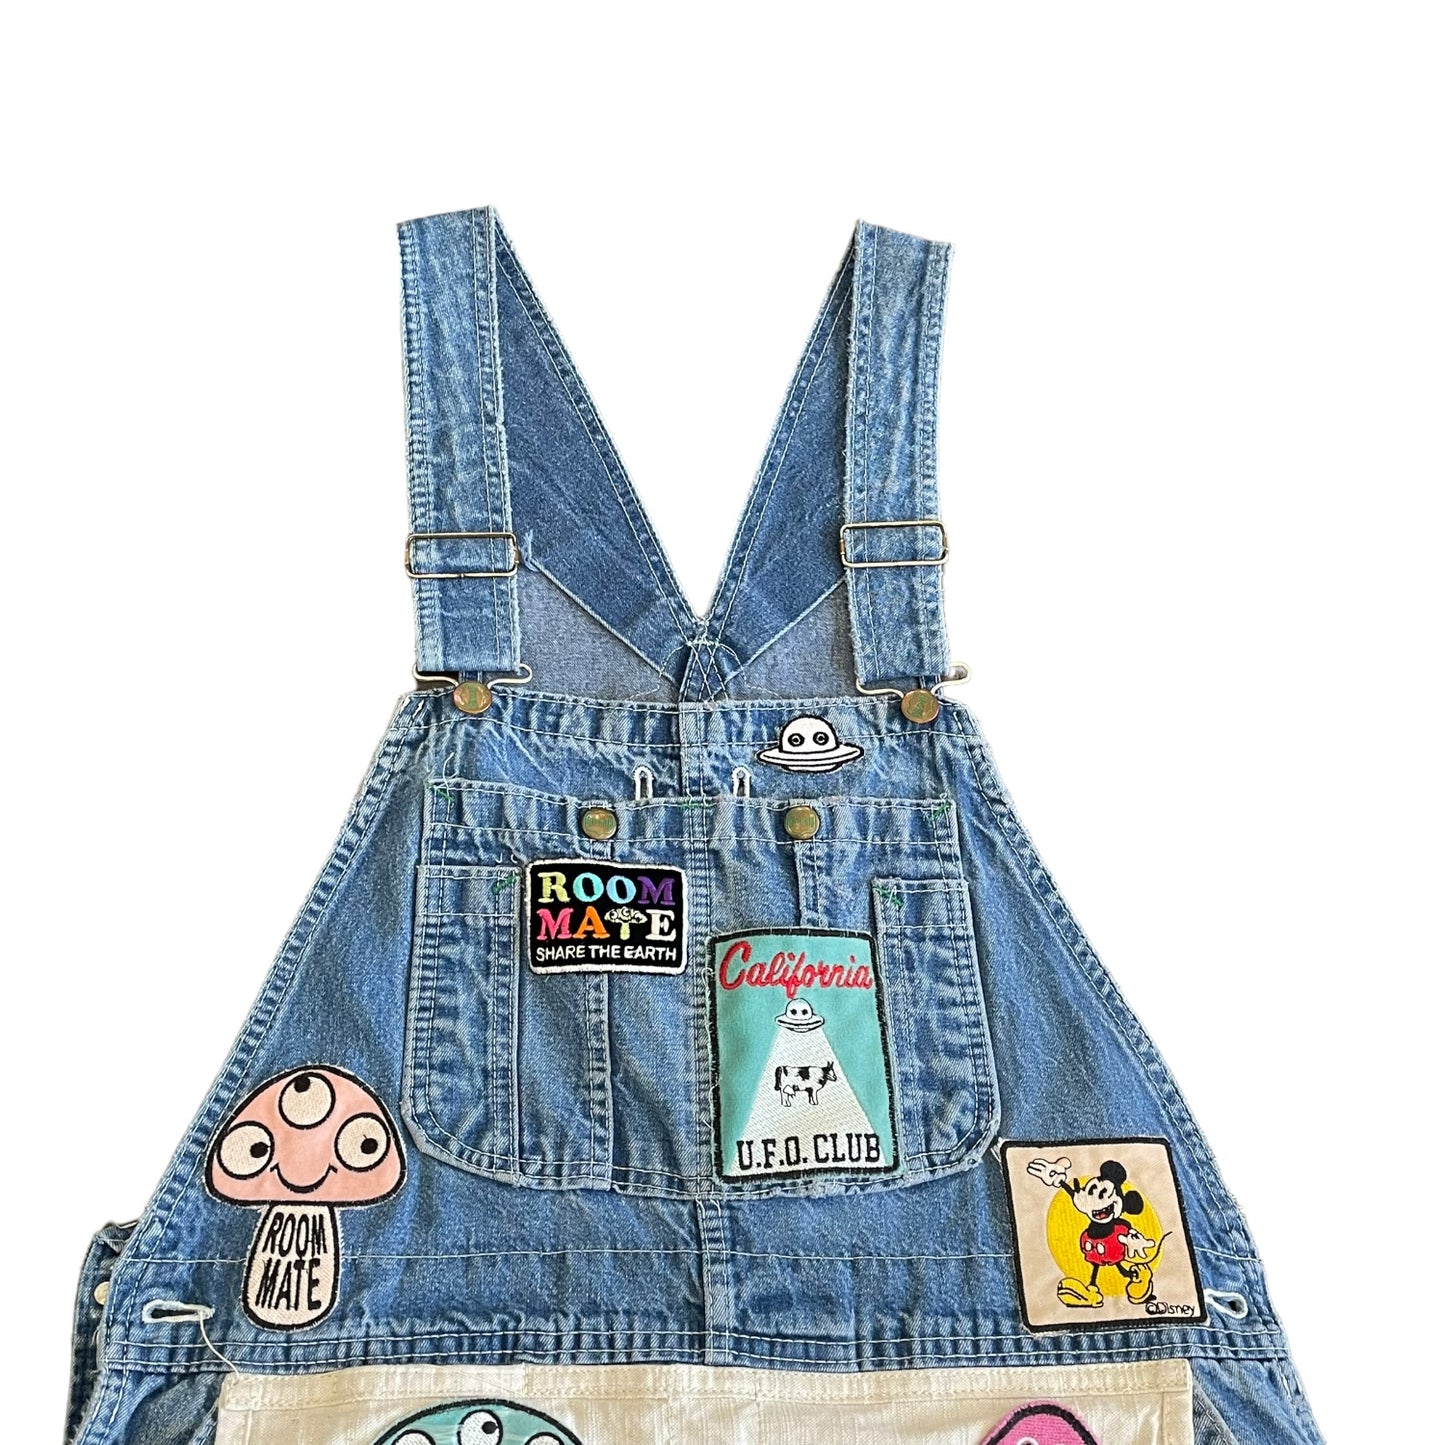 ALM Original recycled vintage overall Big Smith